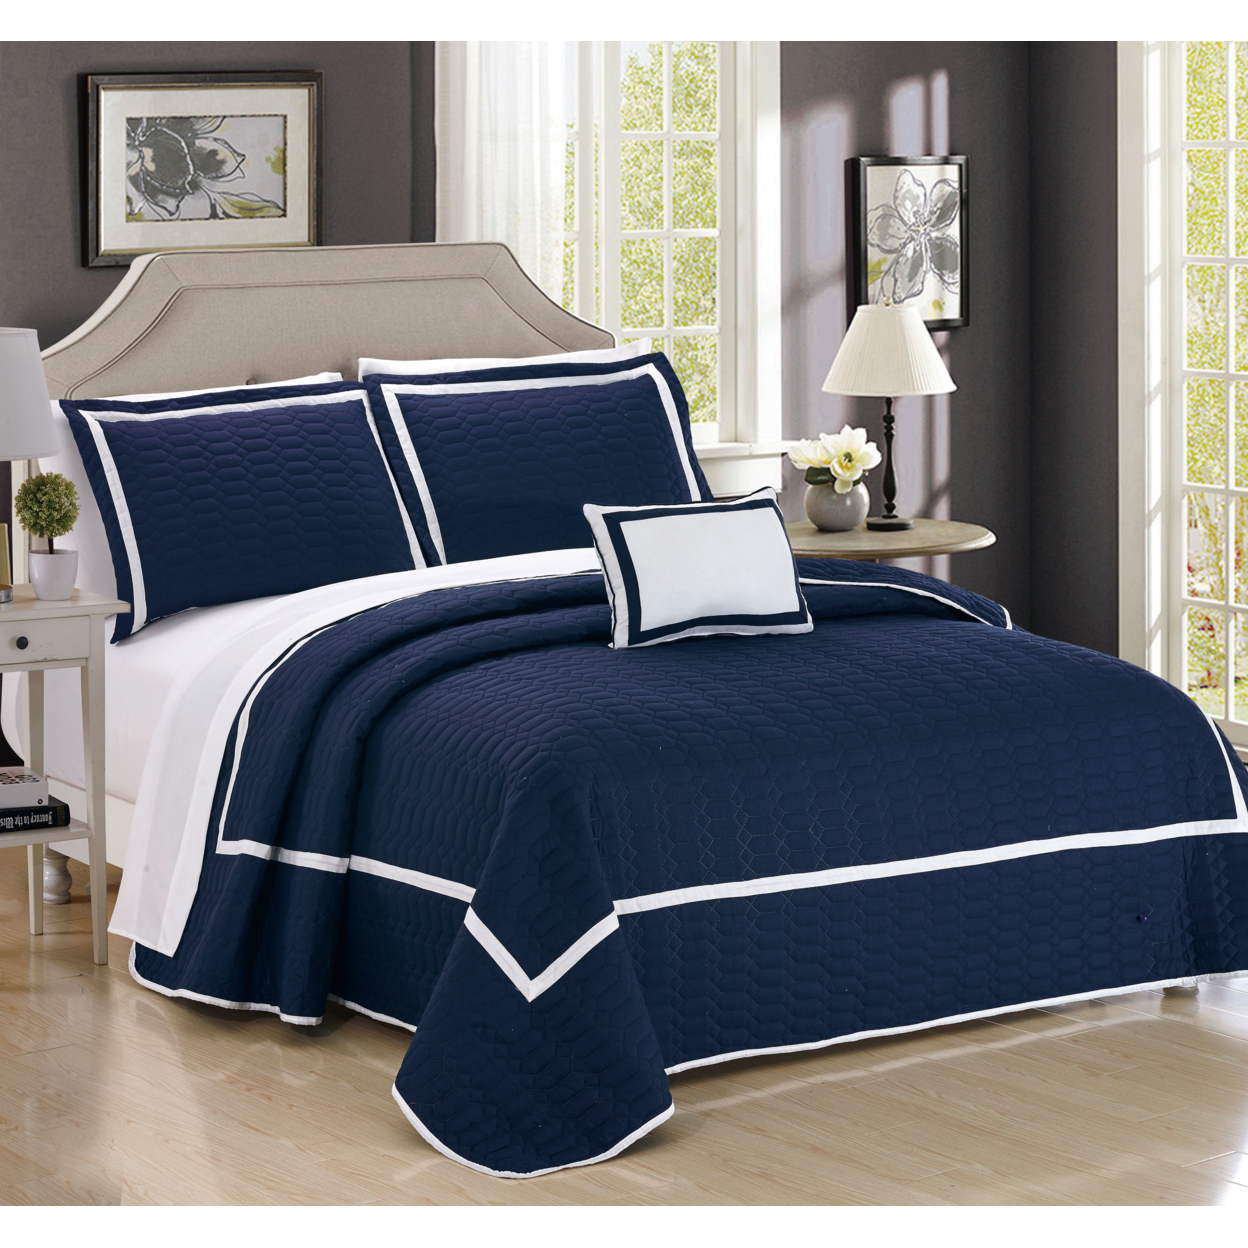 8 Pc. Neal Hotel Collection 2 Tone Banded Geometrical Embroidered, Quilt In A Bag, Includes Sheets Set, Shams & Decorative Pillows - Navy, Q